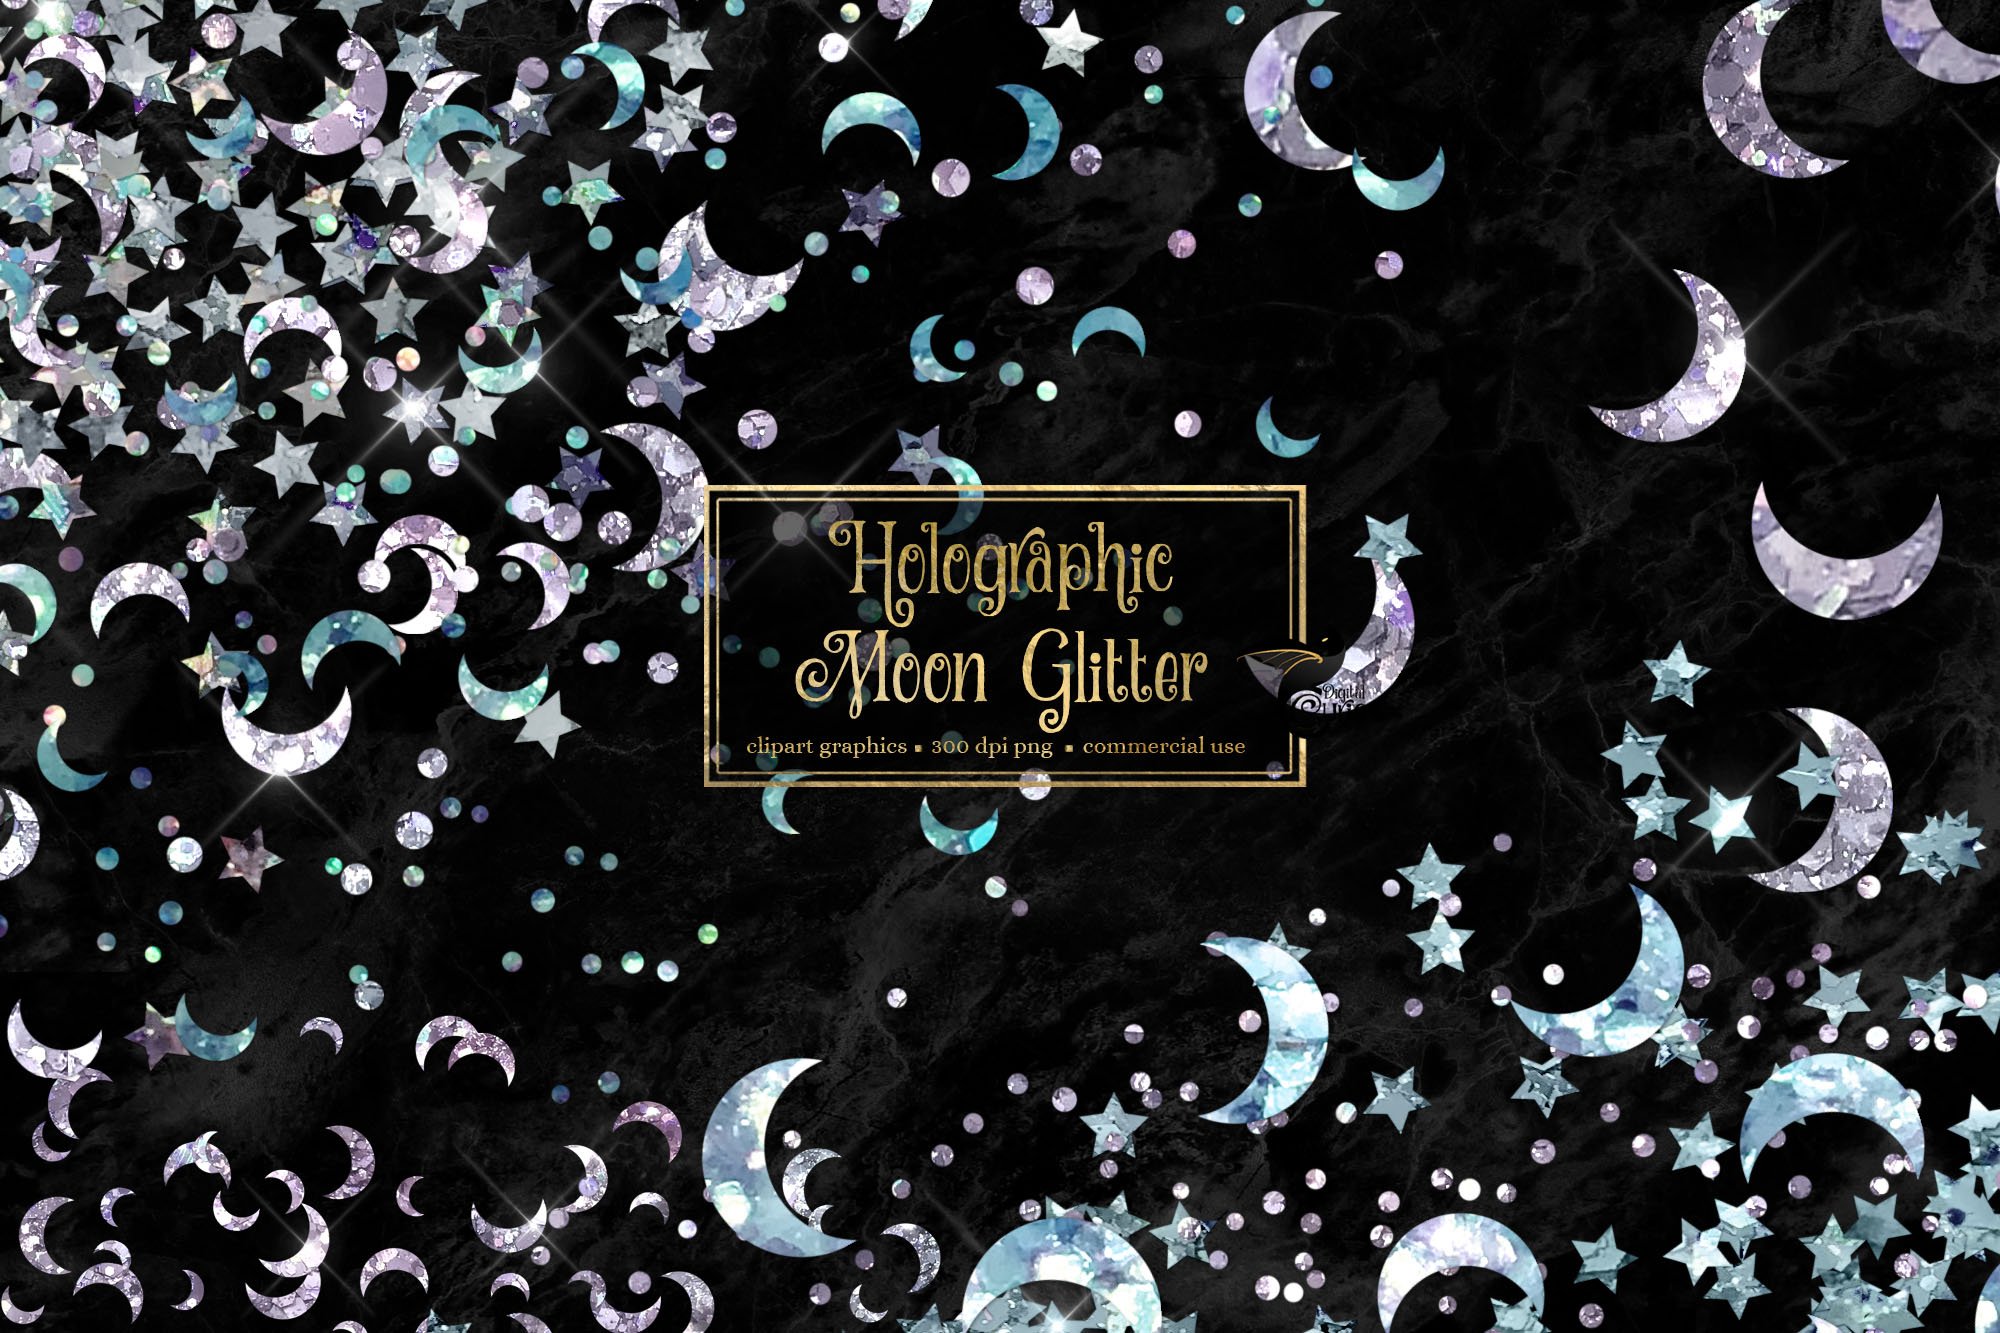 Holographic Moon Glitter Clipart cover image.